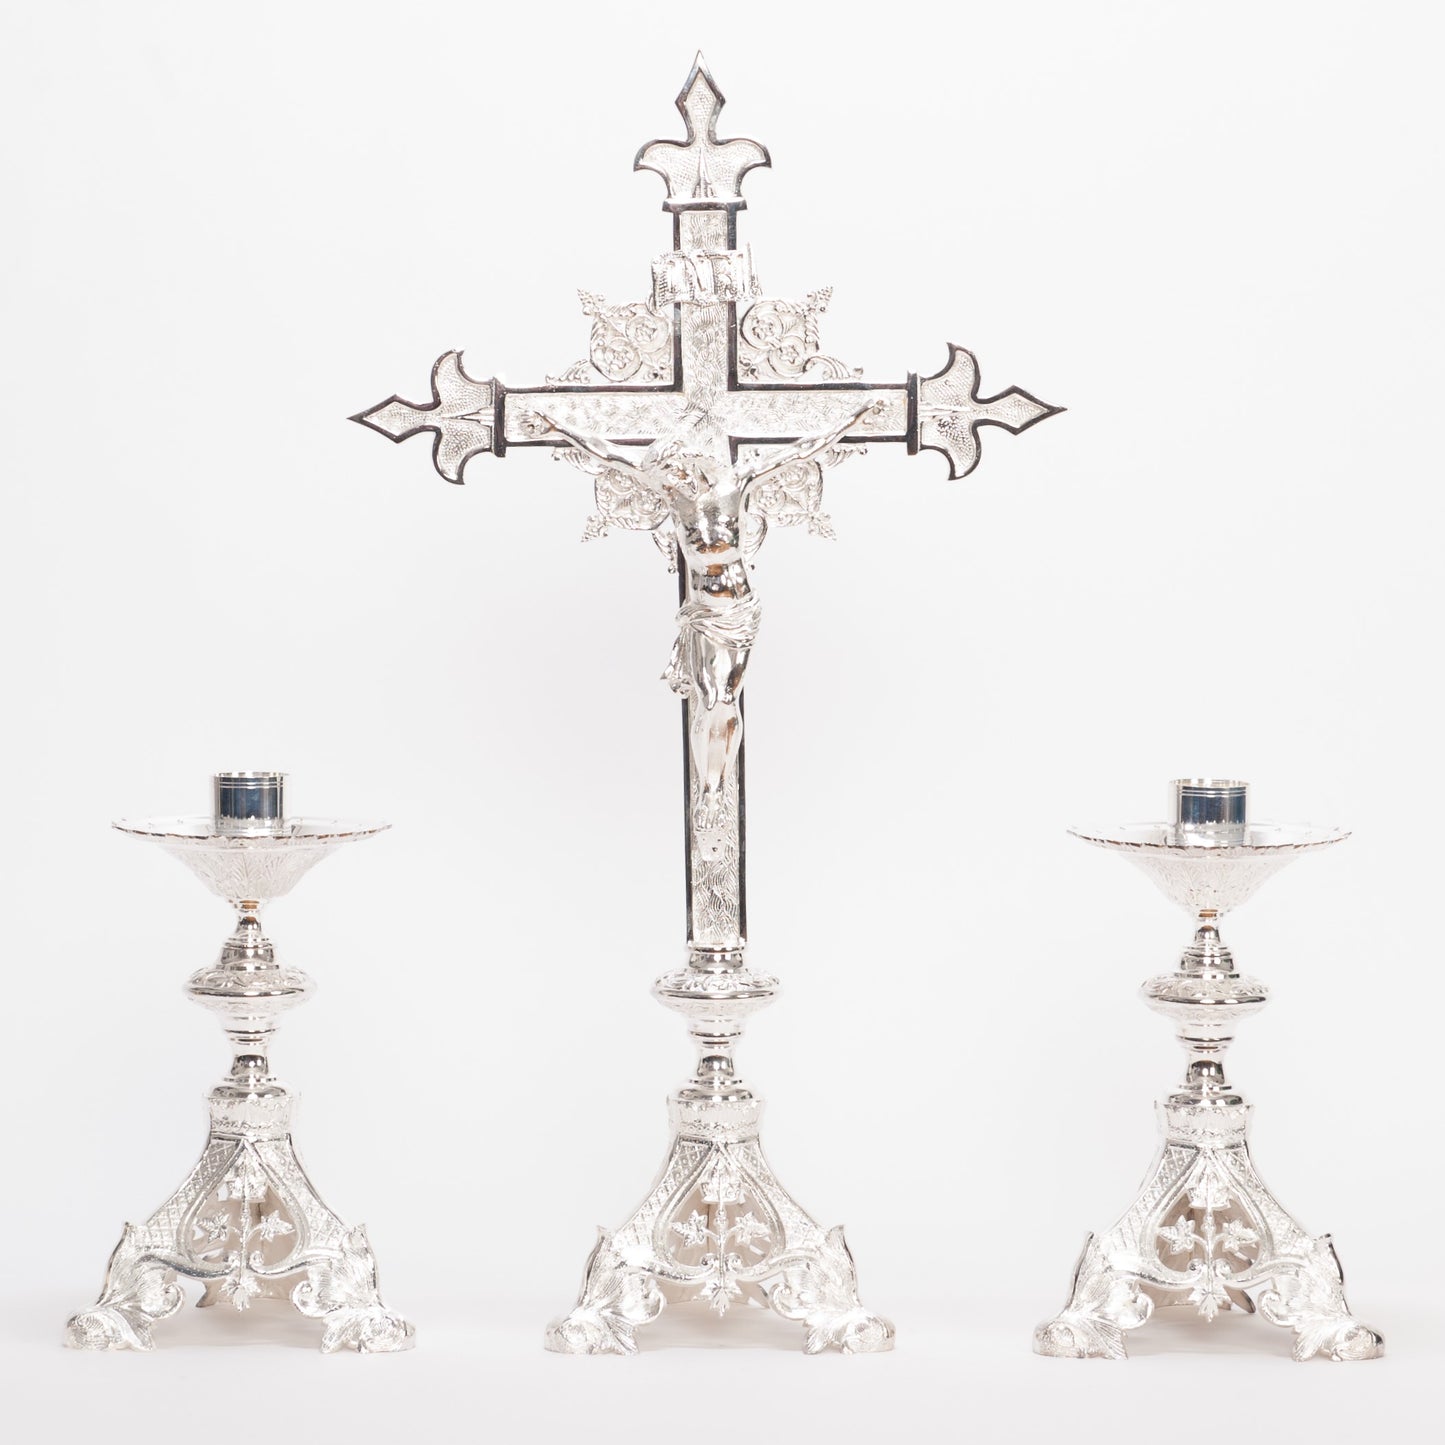 H-135SHS Silver Plated Candlestick